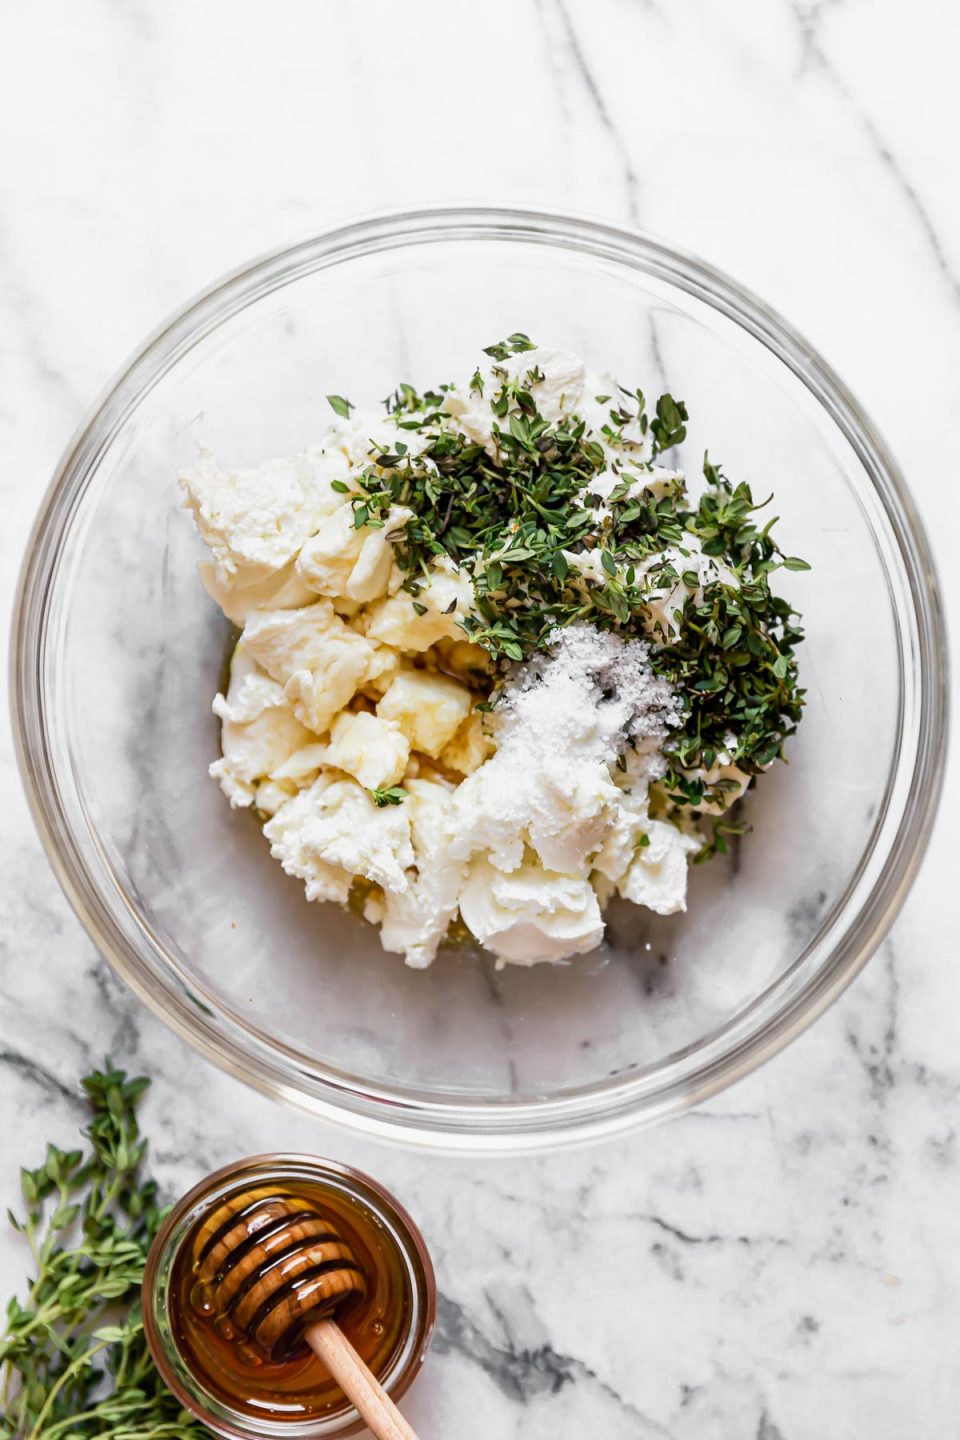 Goat cheese, honey, & fresh thyme in a glass mixing bowl, on a white marble surface next to fresh thyme & a small jar of honey.